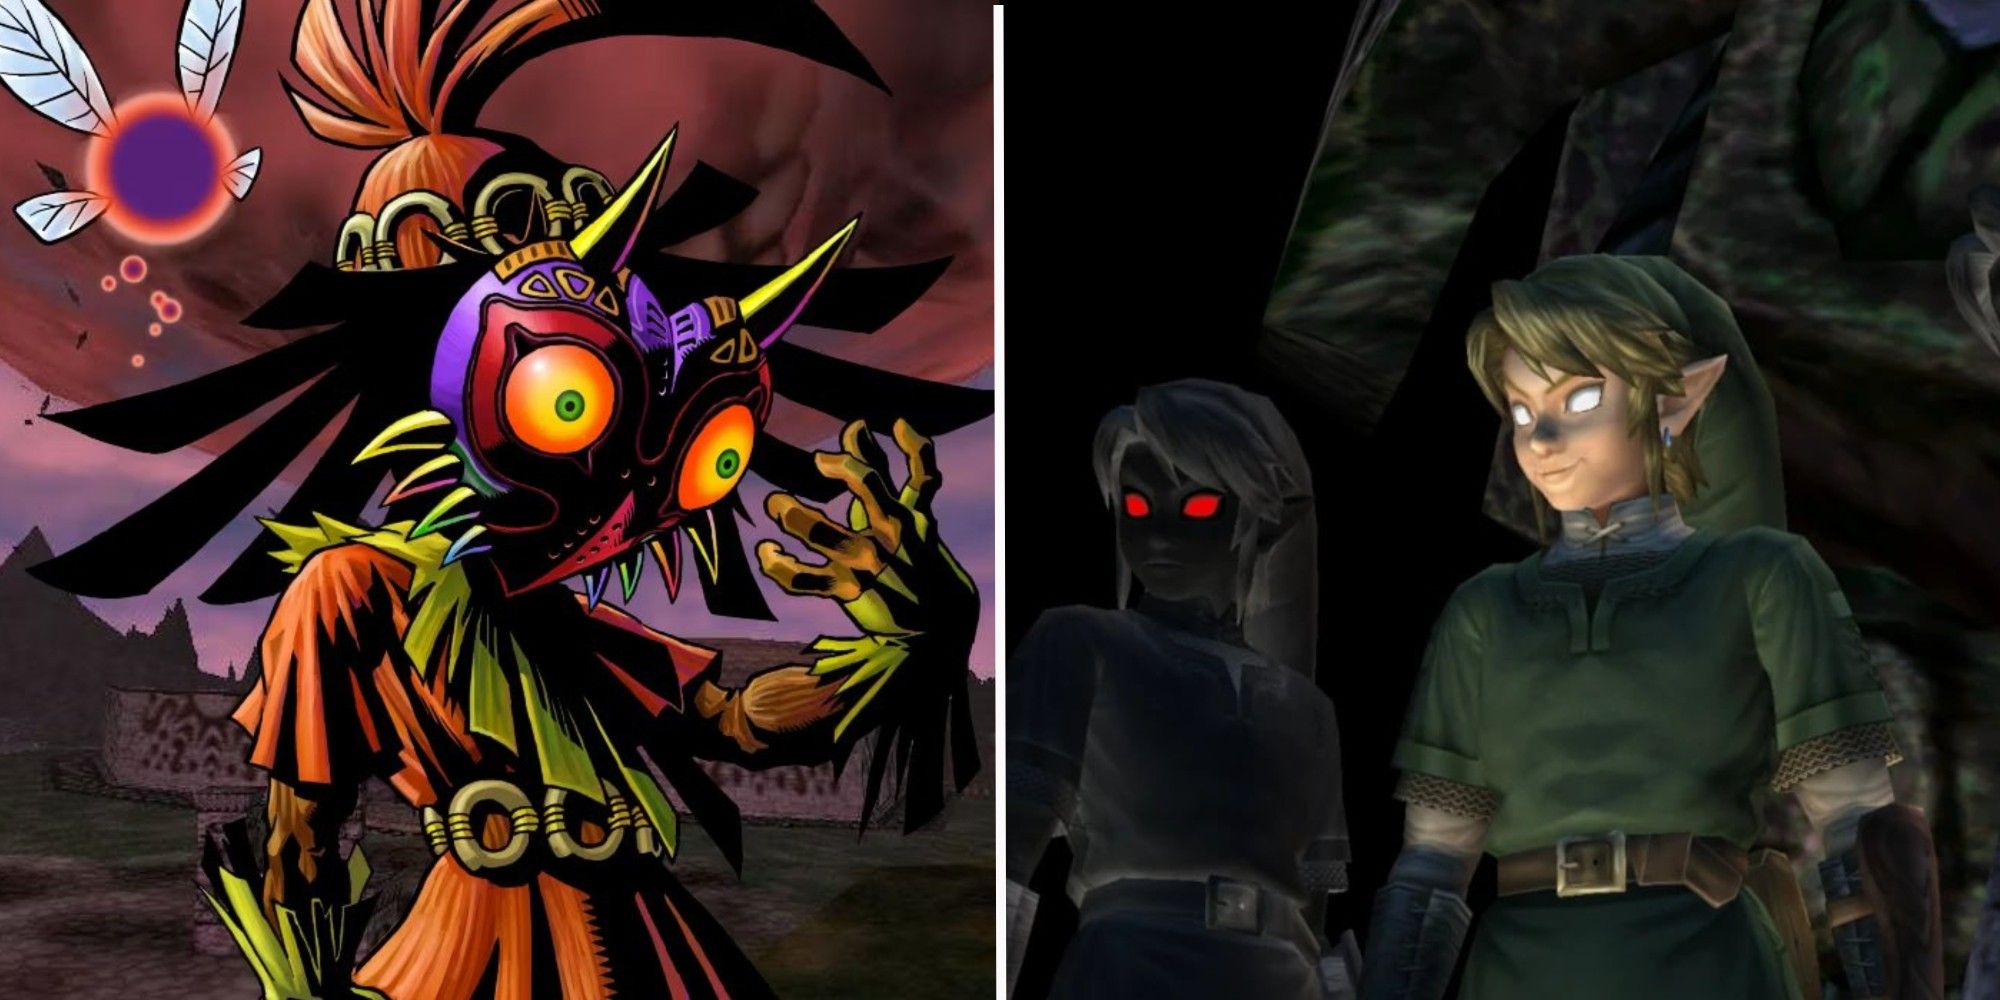 Majora controlling the Skull Kid's body, Teal the fairy flying, and the interlopers sneering in the Legend of Zelda Series